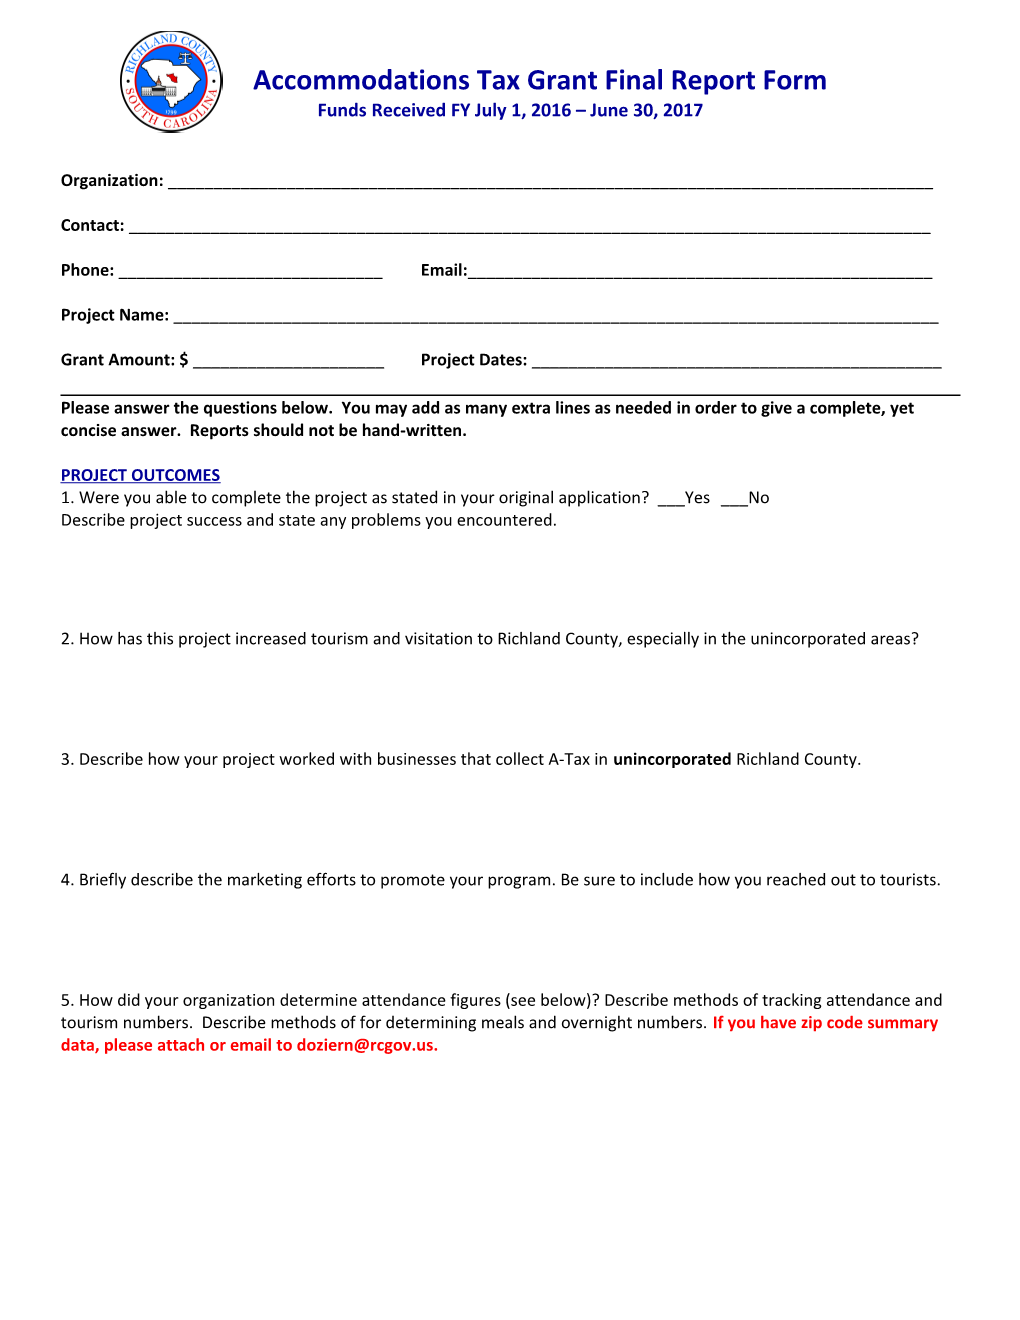 Hospitality Tax Grant Payment Request Form